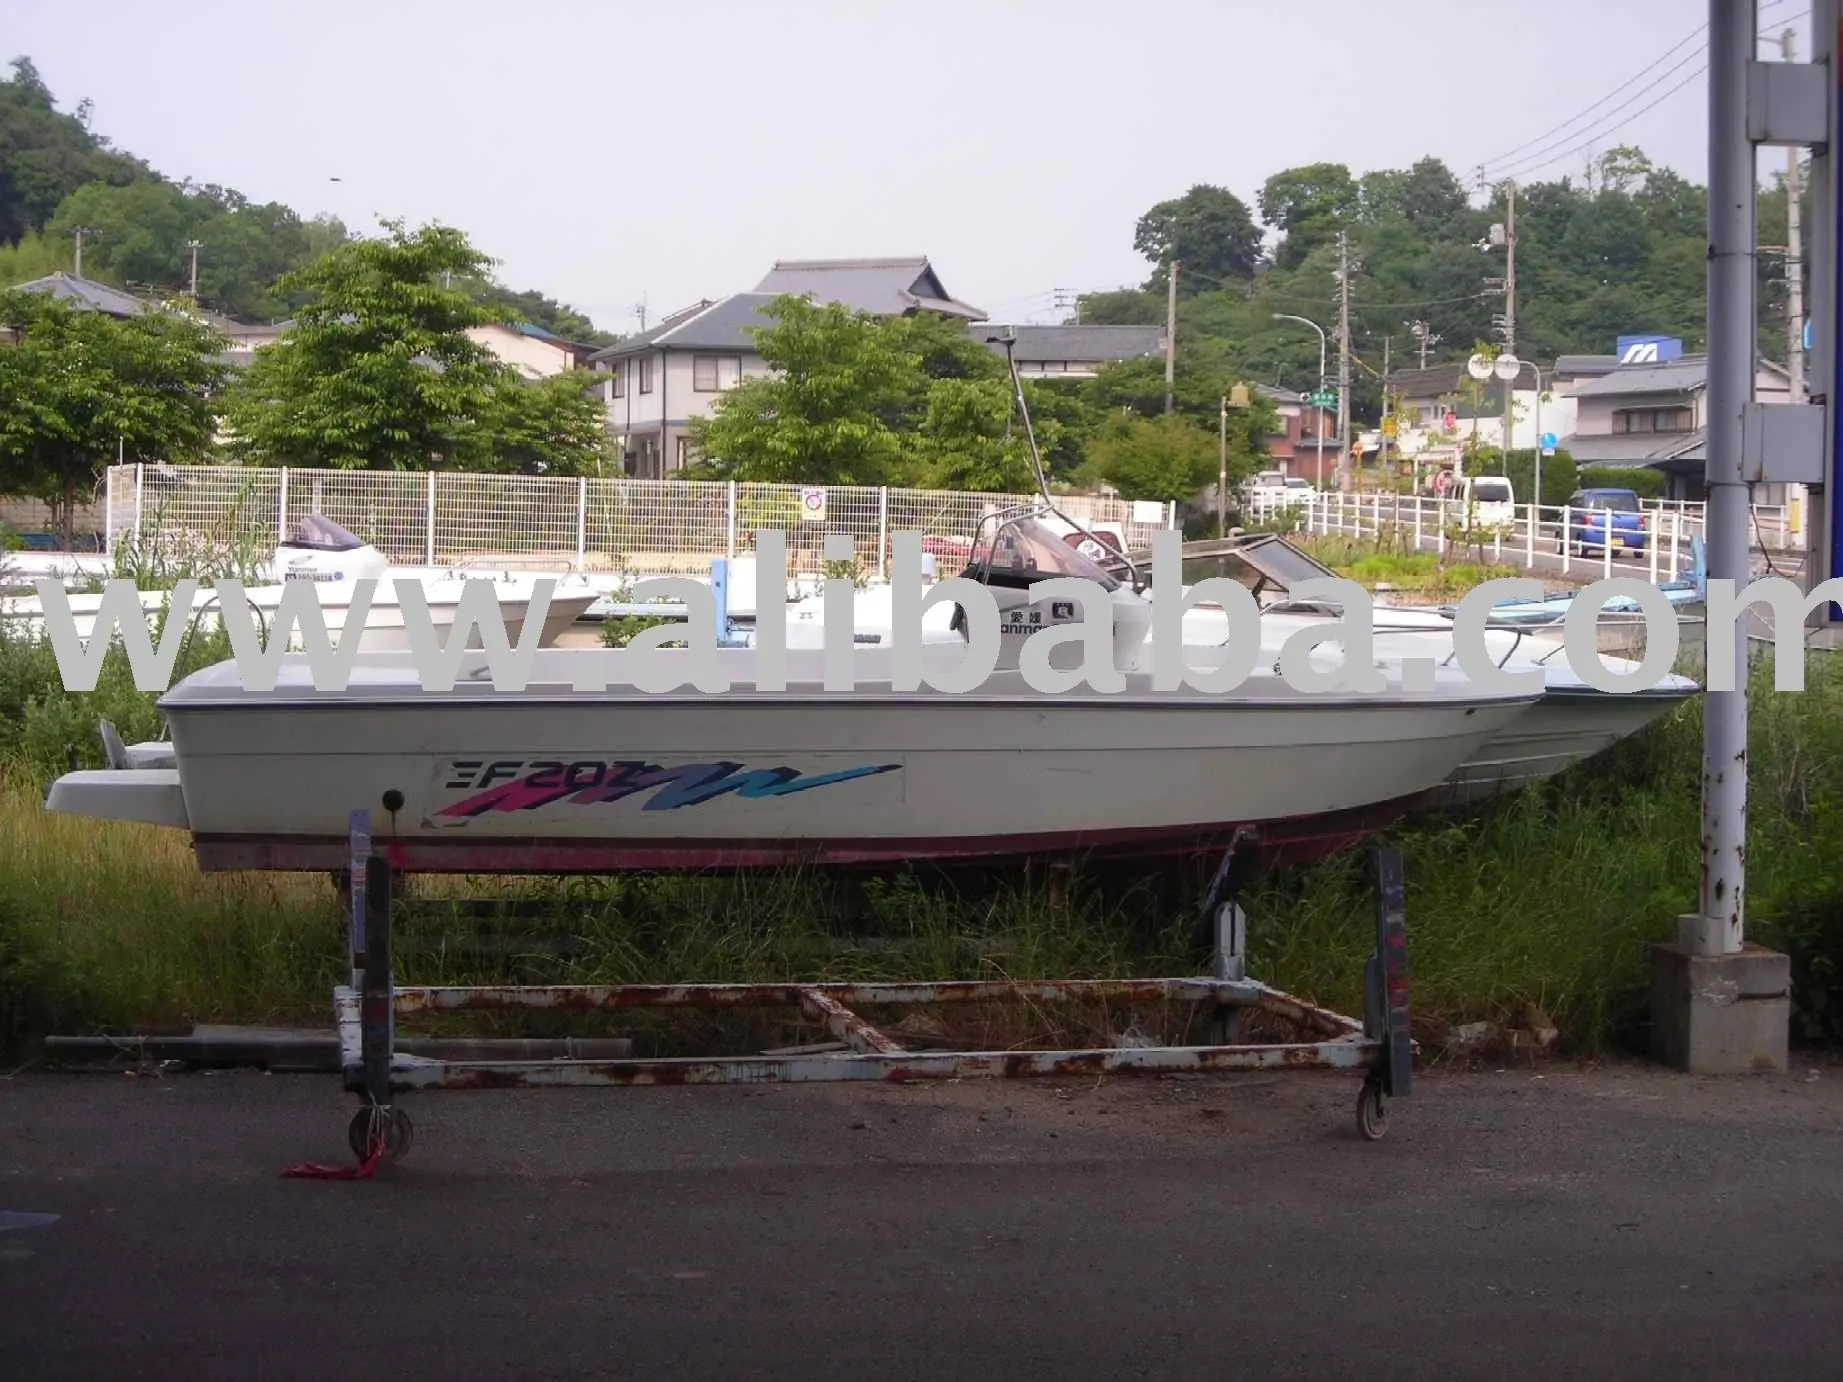 Buy Used Boats Product on Alibaba.com